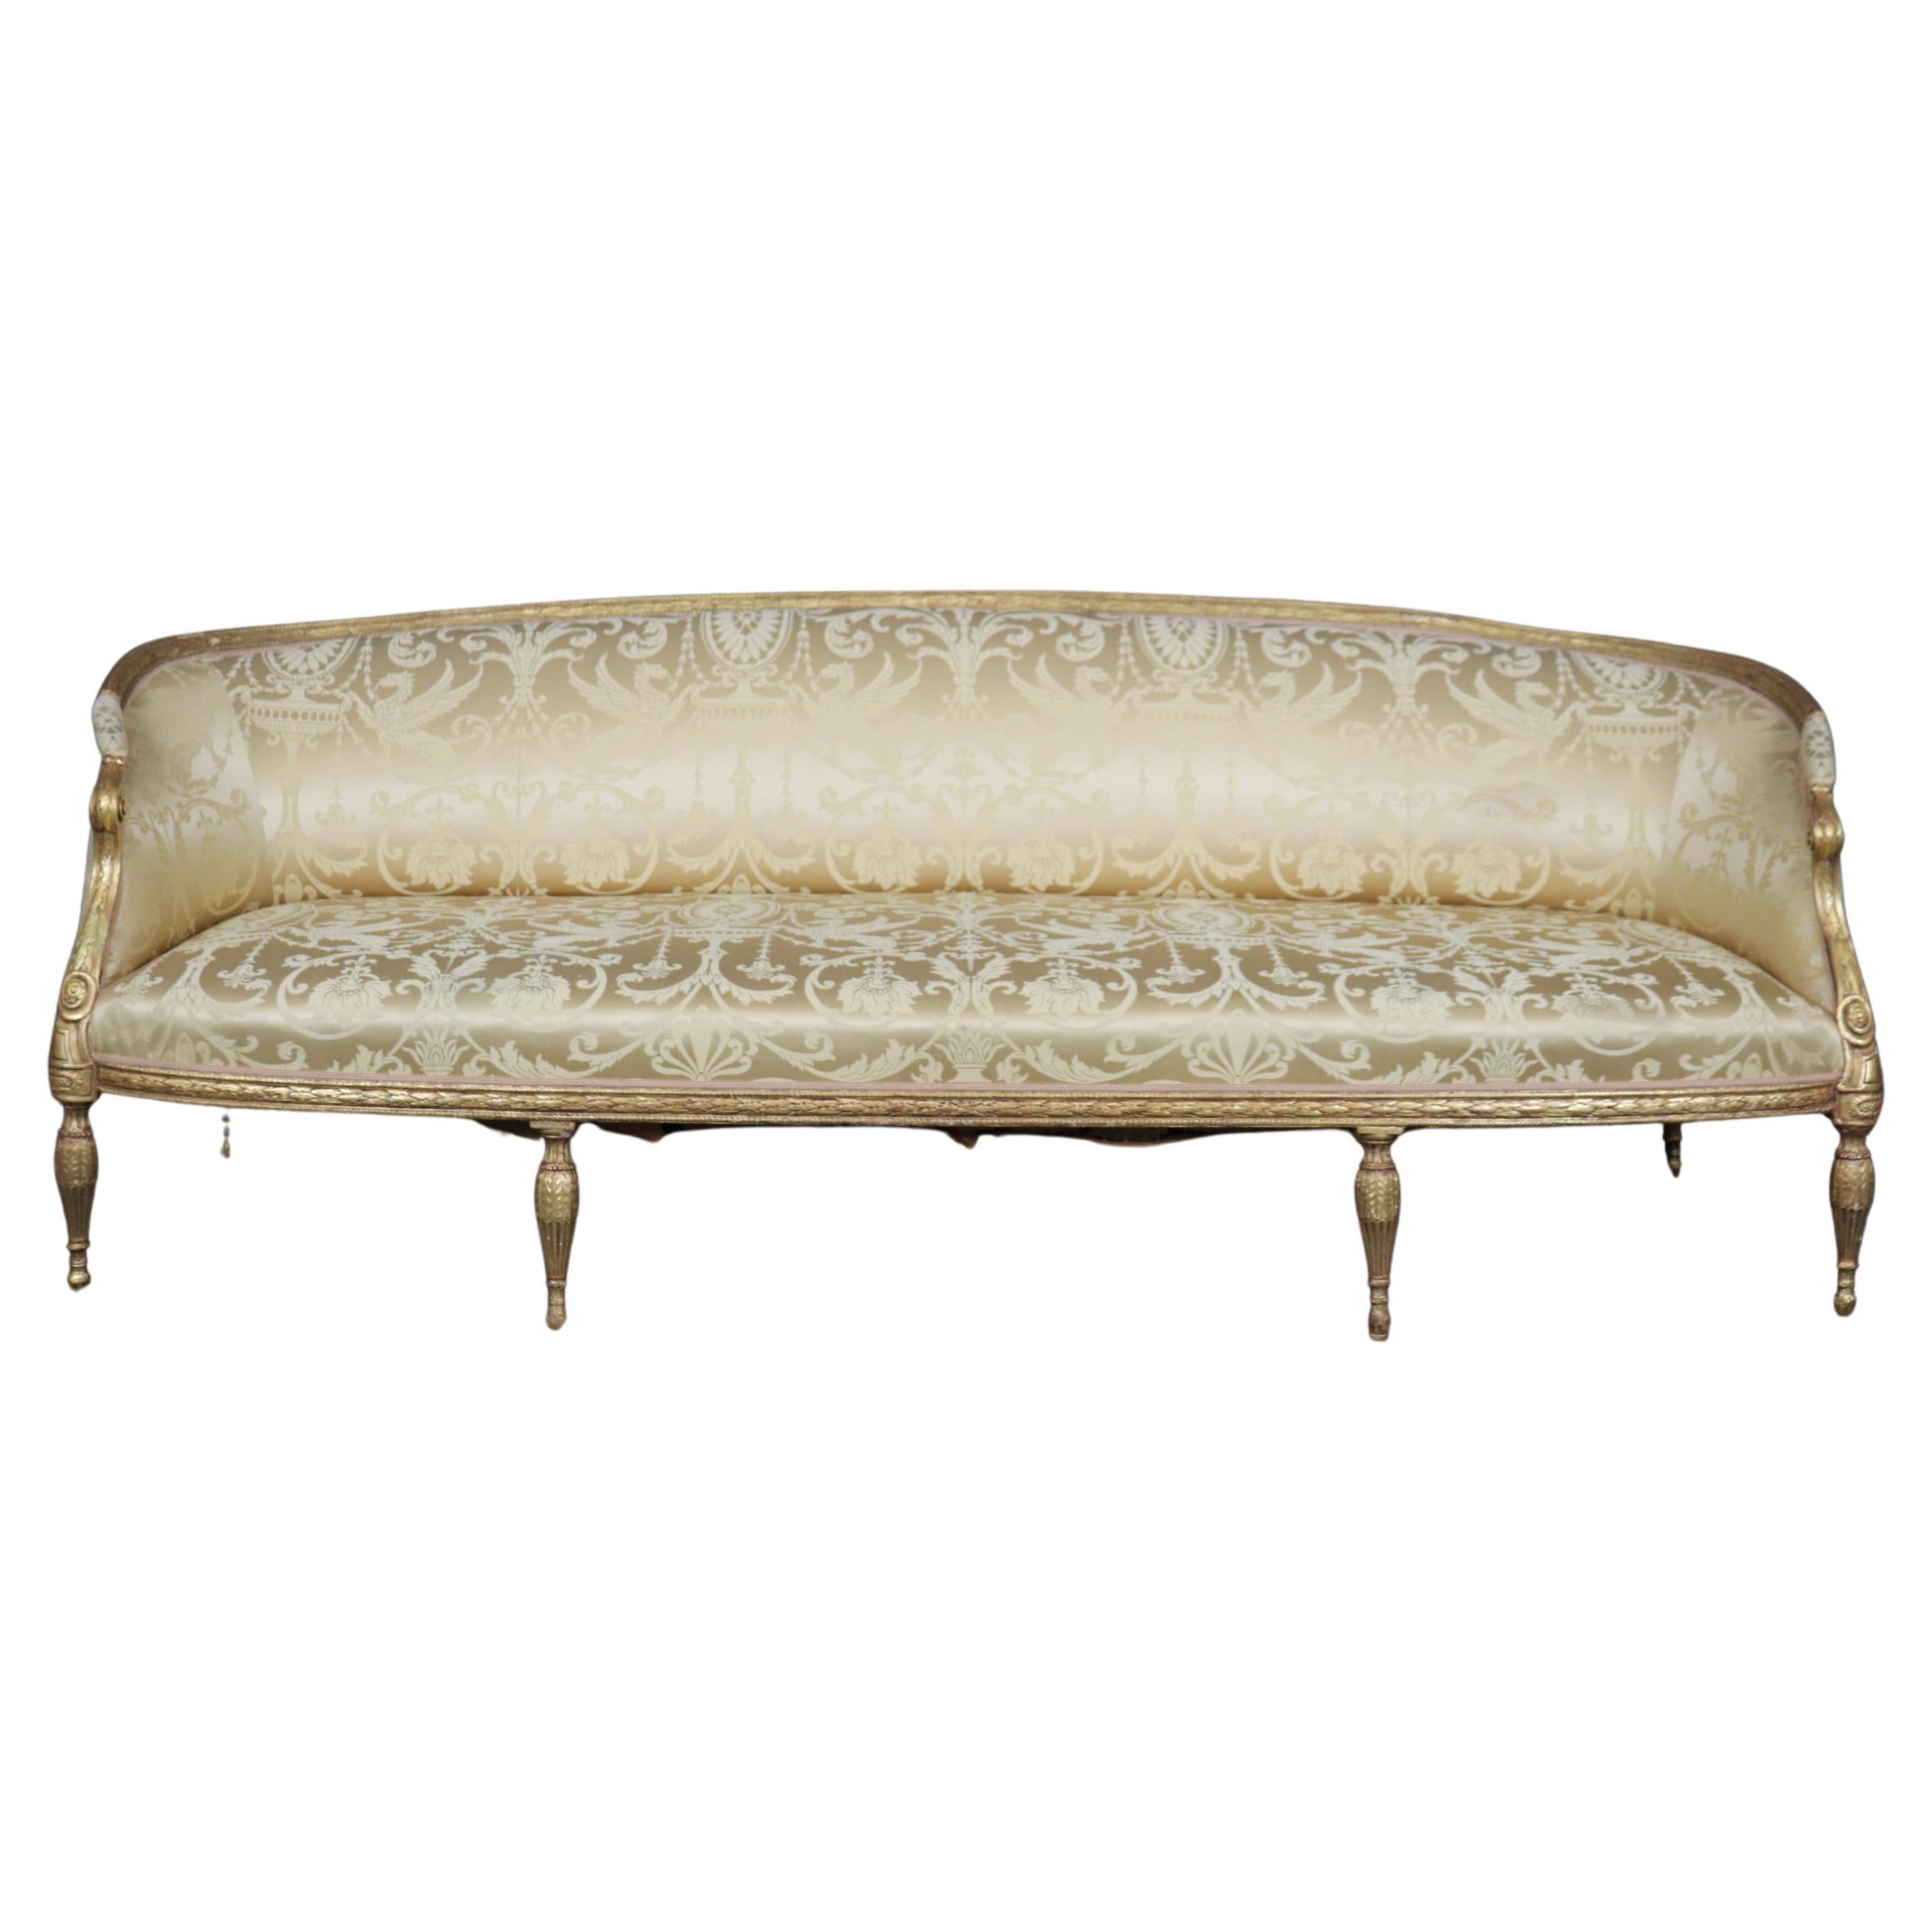 Monumental Gilded Meticulously Carved French Louis XVI Sofa Silk Upholstery